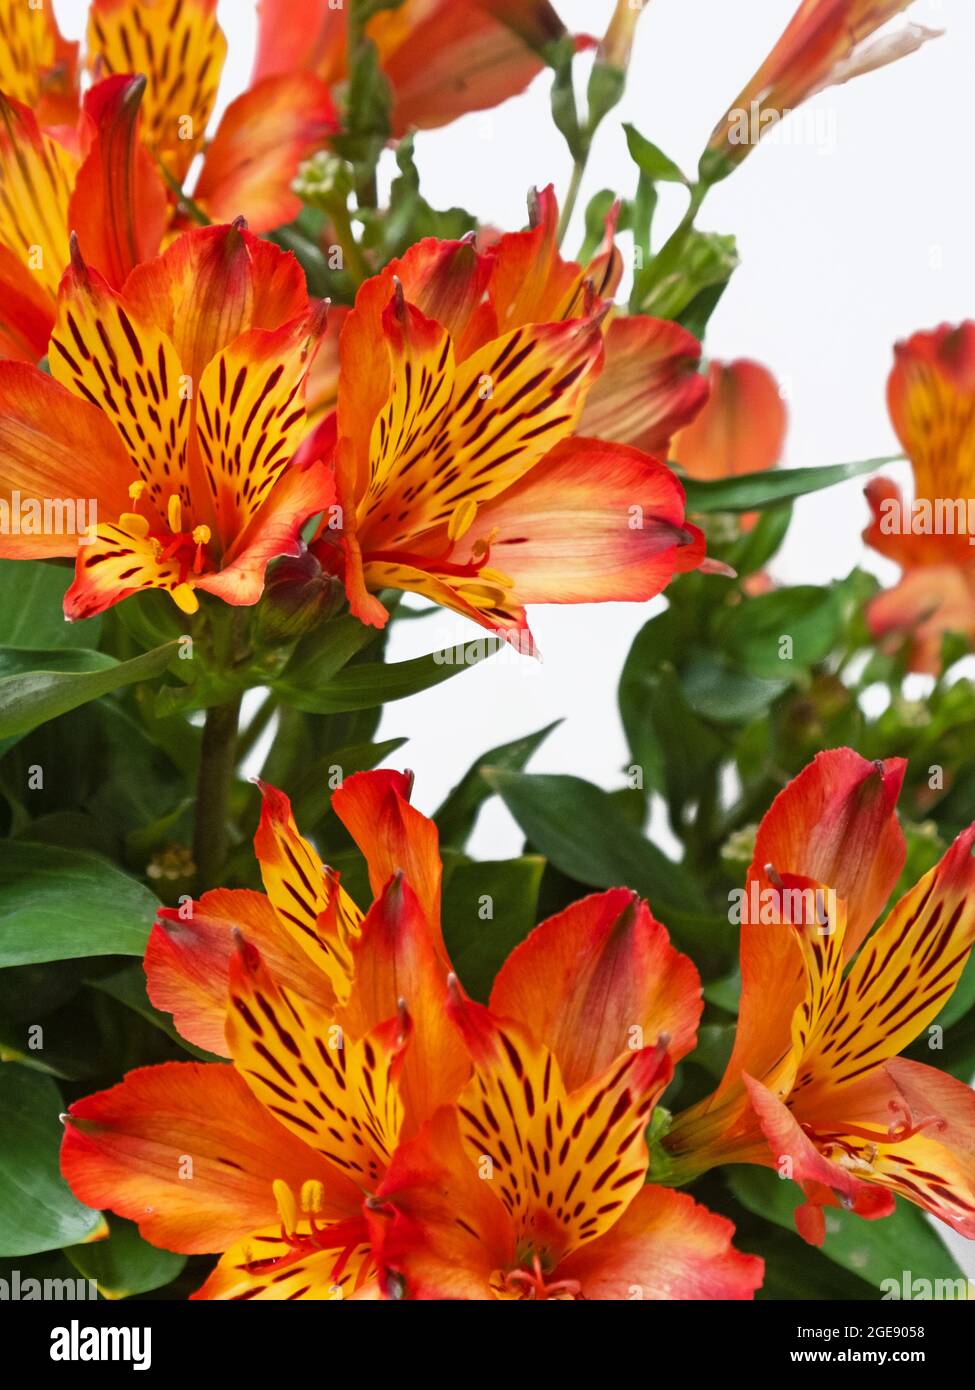 Colourful display of red and amber Alstroemeria aurea flowers ( also known as the Peruvian Lily ) native to the Americas Stock Photo